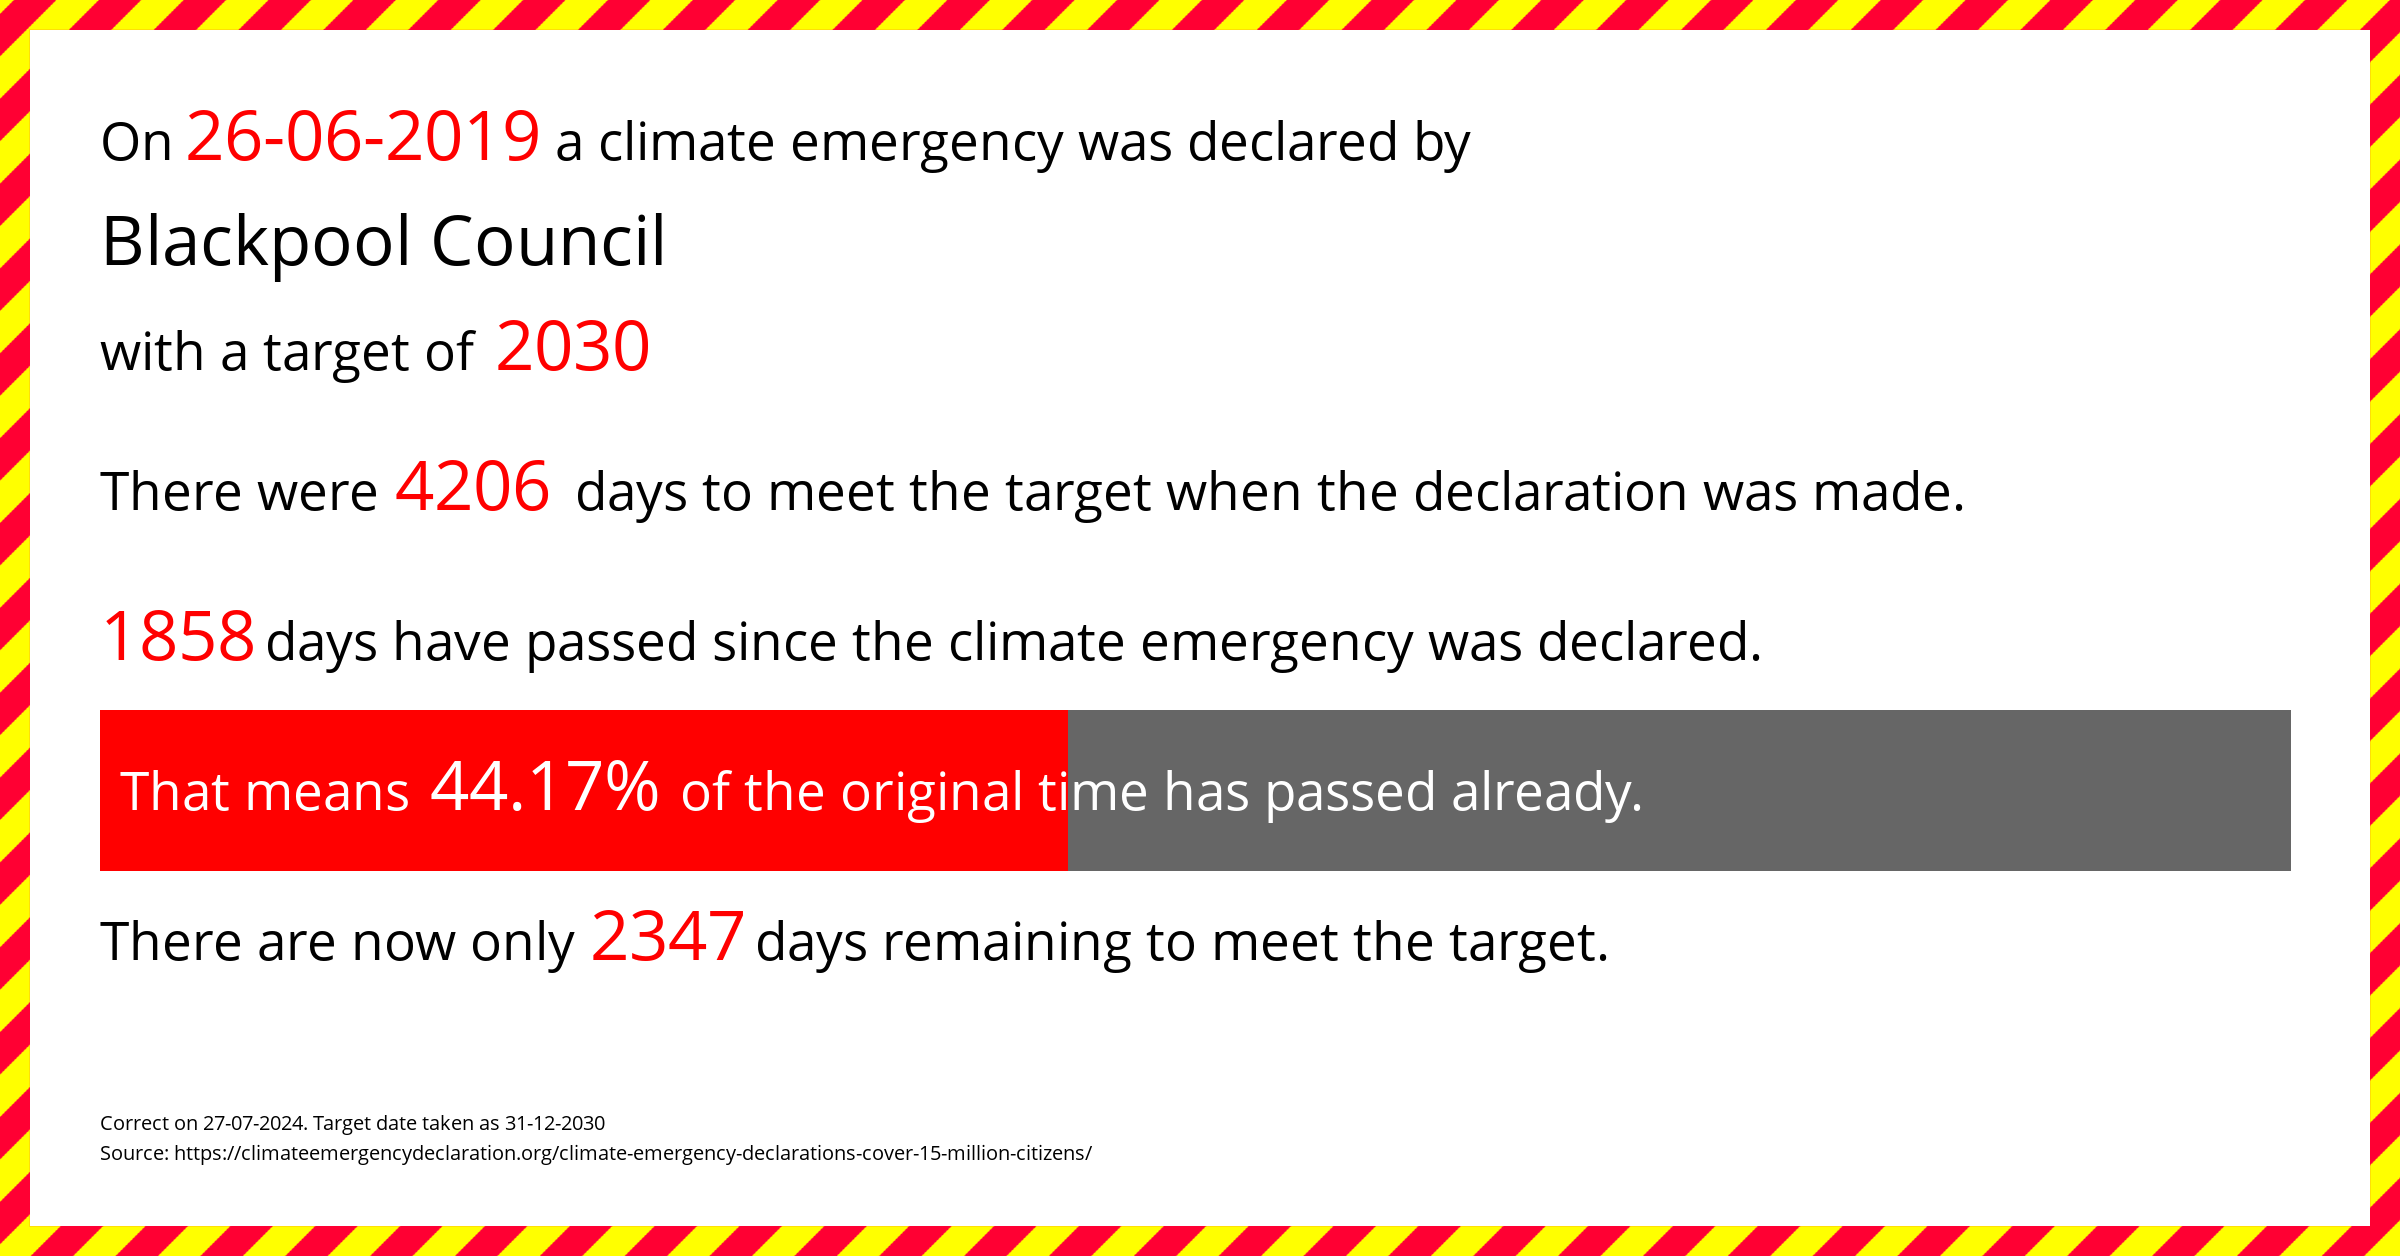 Blackpool Council declared a Climate emergency on Wednesday 26th June 2019, with a target of 2030.